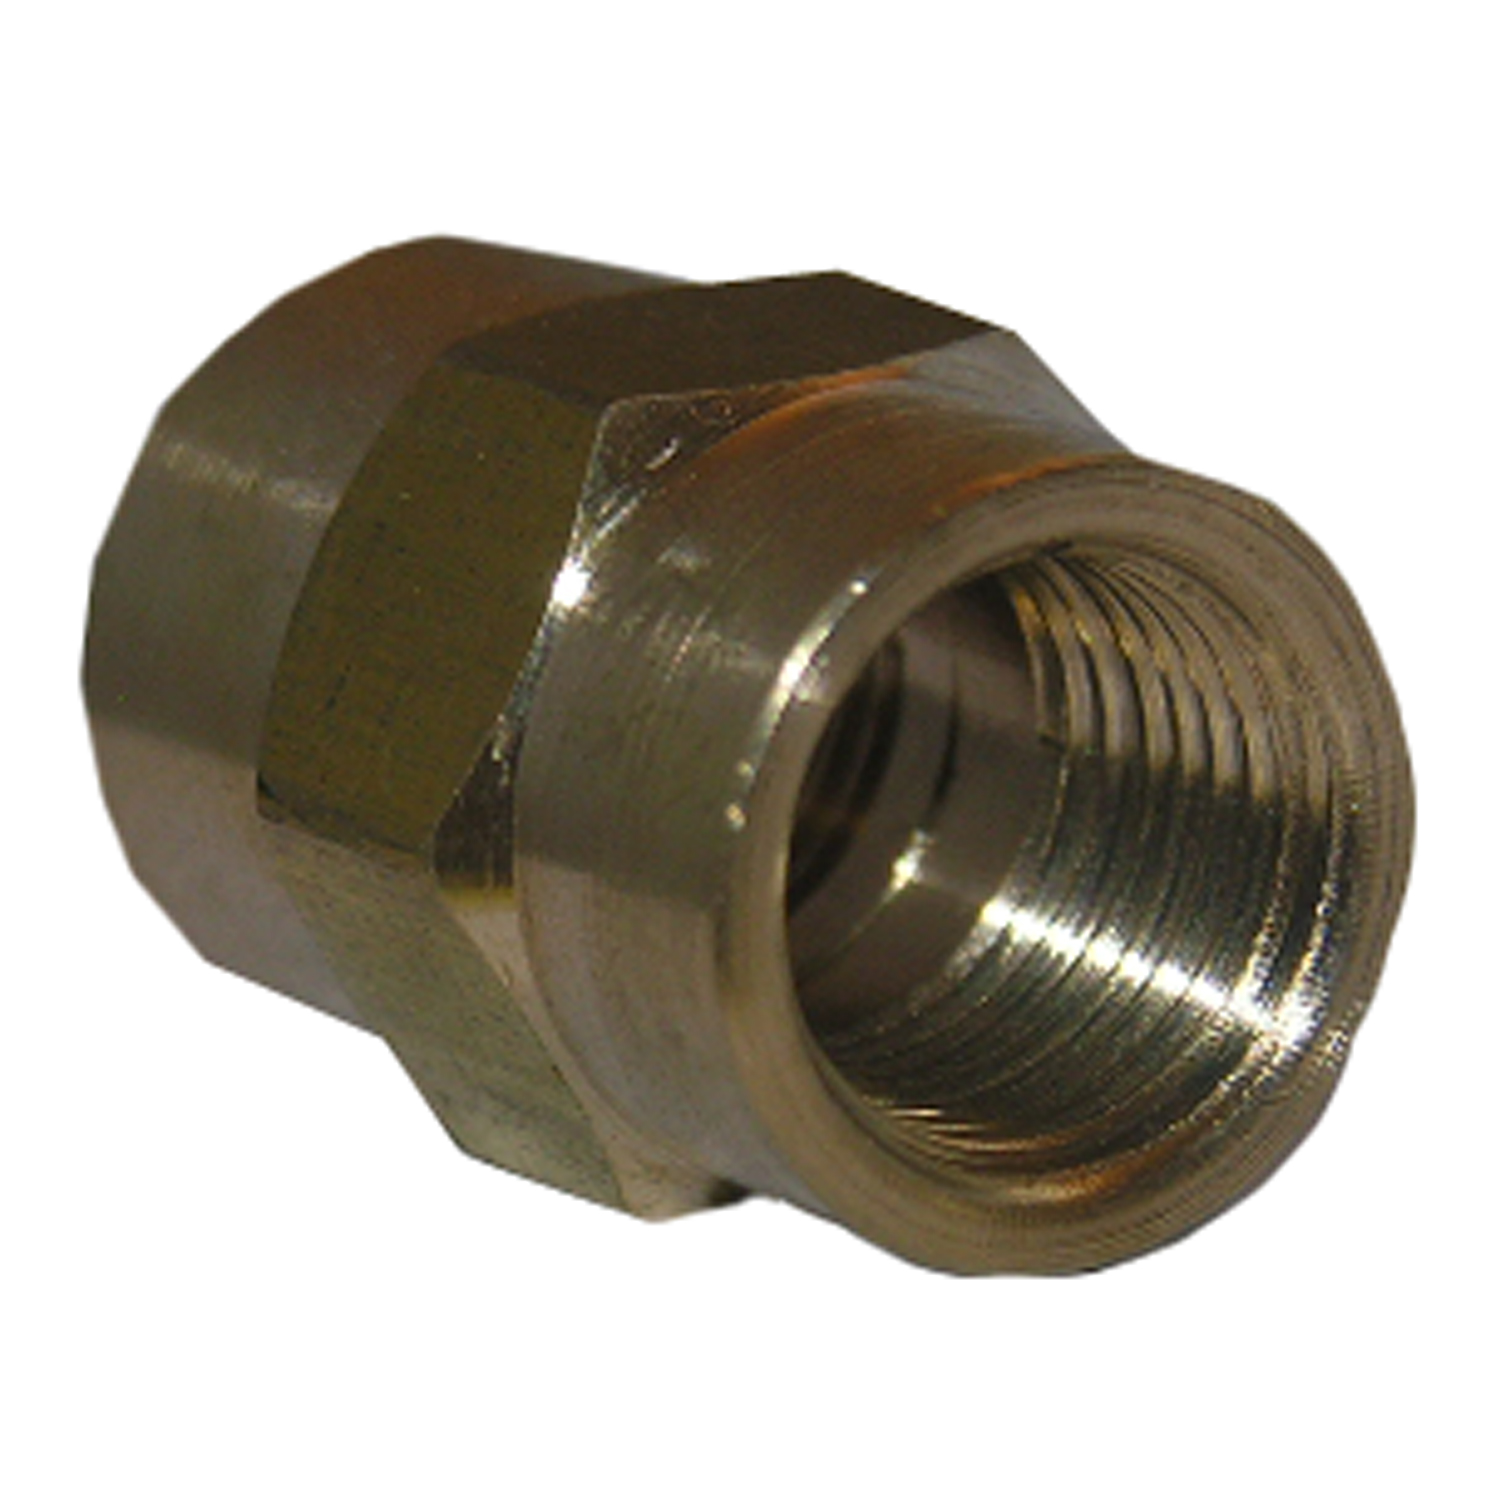 Lasco 17-9221 Pipe Coupling, 1/8 in, FPT, Brass